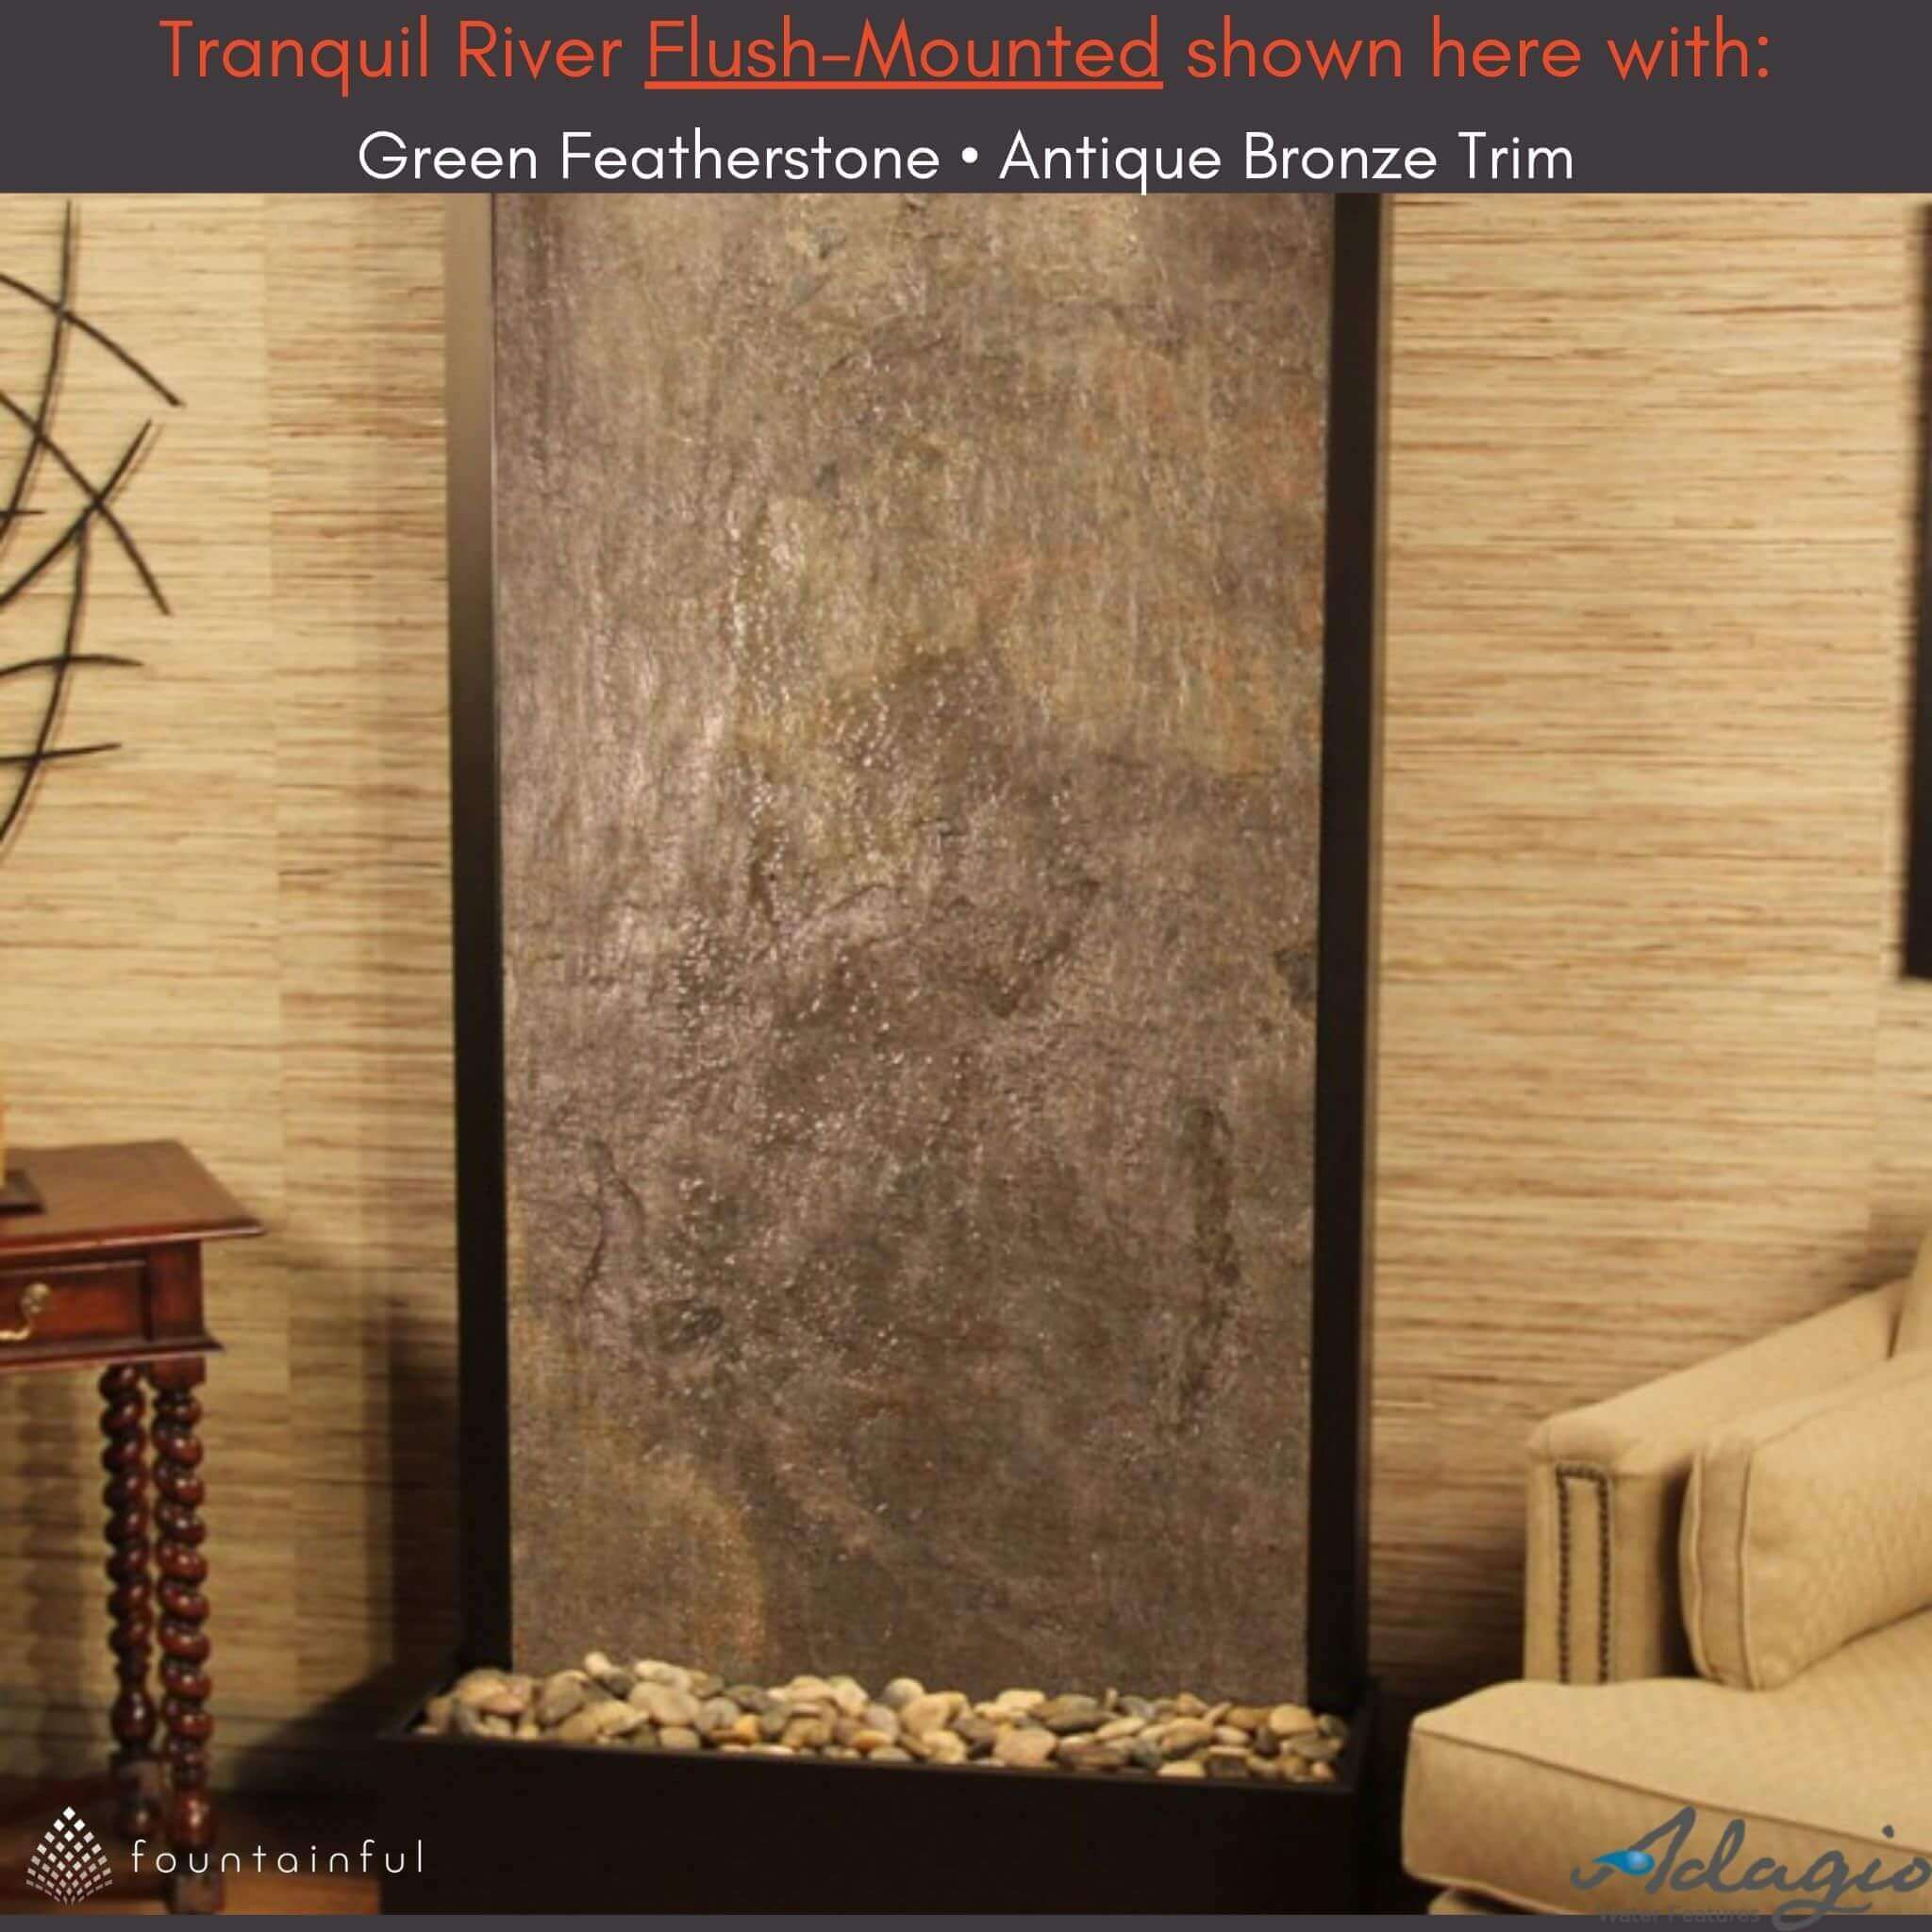 Tranquil River Freestanding Water Wall Fountain - Adagio